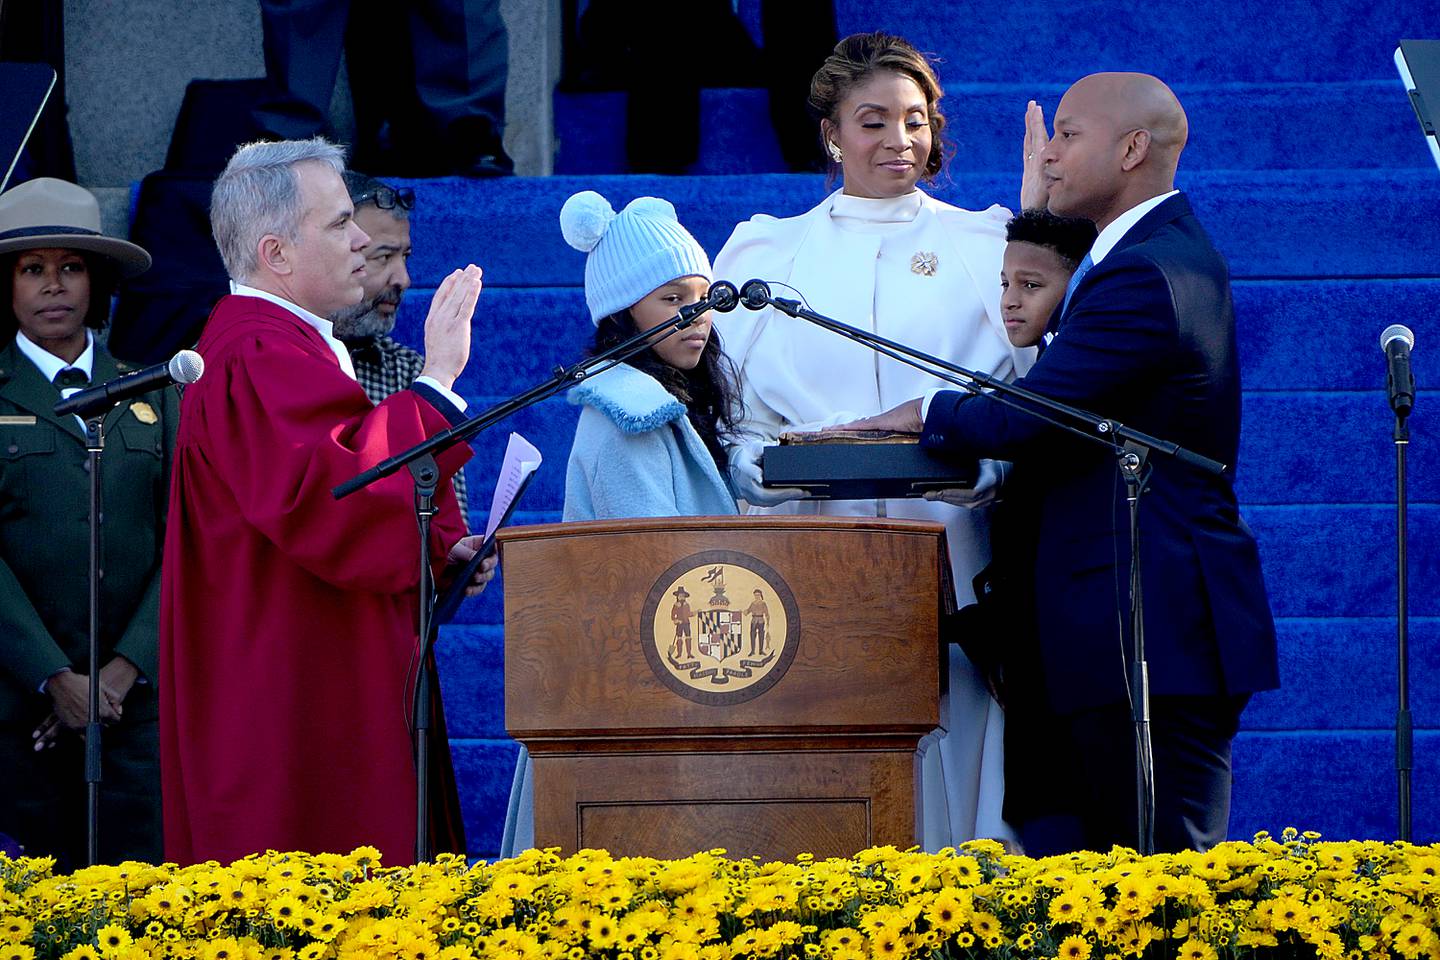 Gov. Wes Moore is sworn into office by Chief Justice Matthew Fader during his inauguration as the first African-American governor for the state of Maryland at the Maryland State House in Annapolis, Wednesday, Jan. 18, 2023. (Kaitlin Newman/The Baltimore Banner)